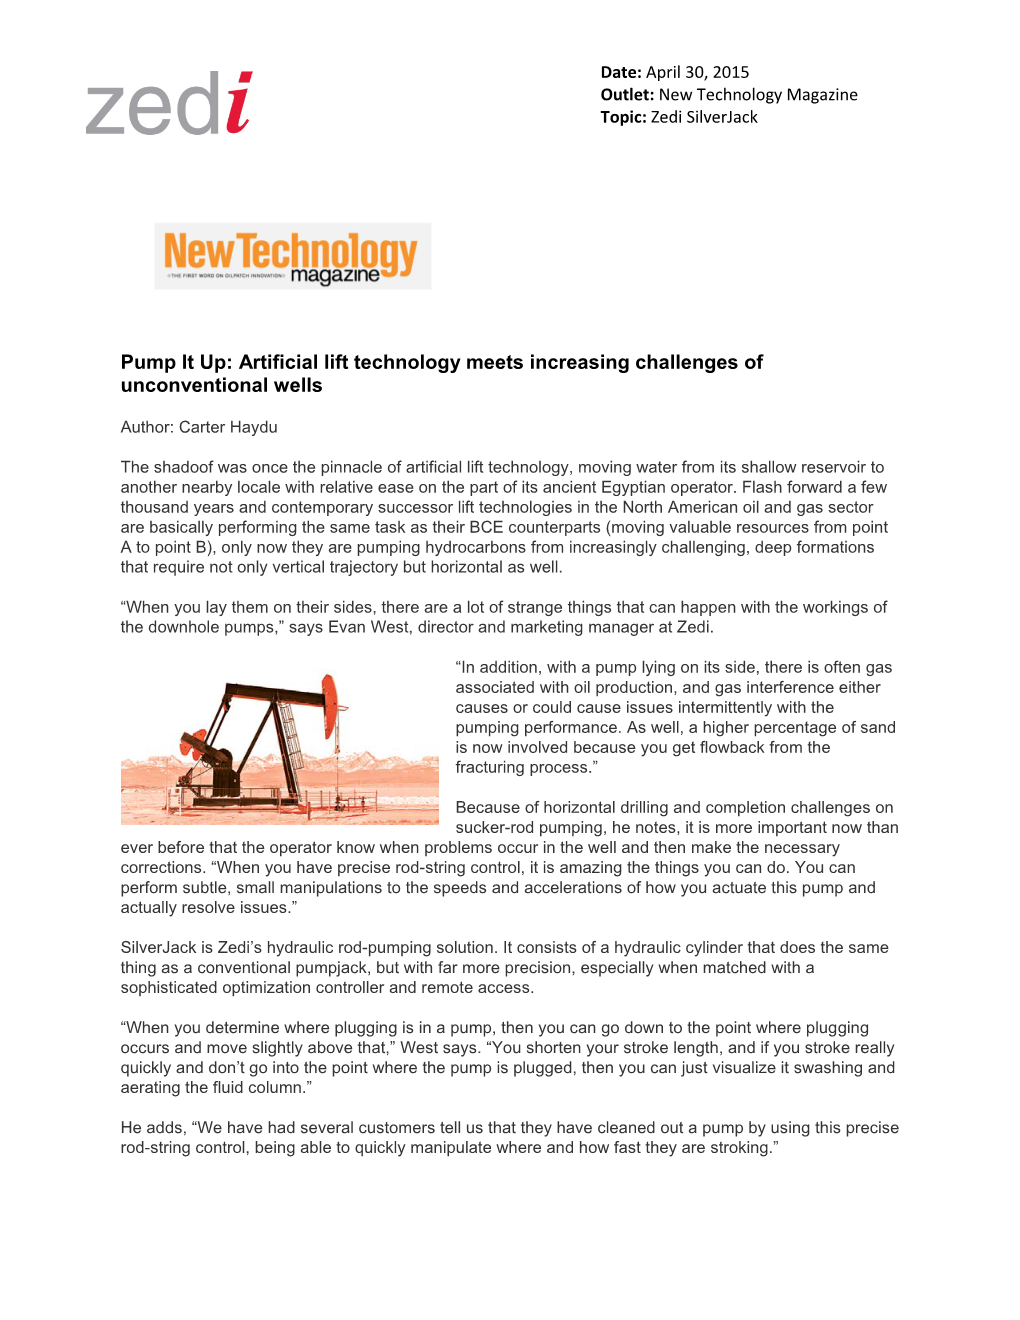 Pump It Up: Artificial Lift Technology Meets Increasing Challenges of Unconventional Wells